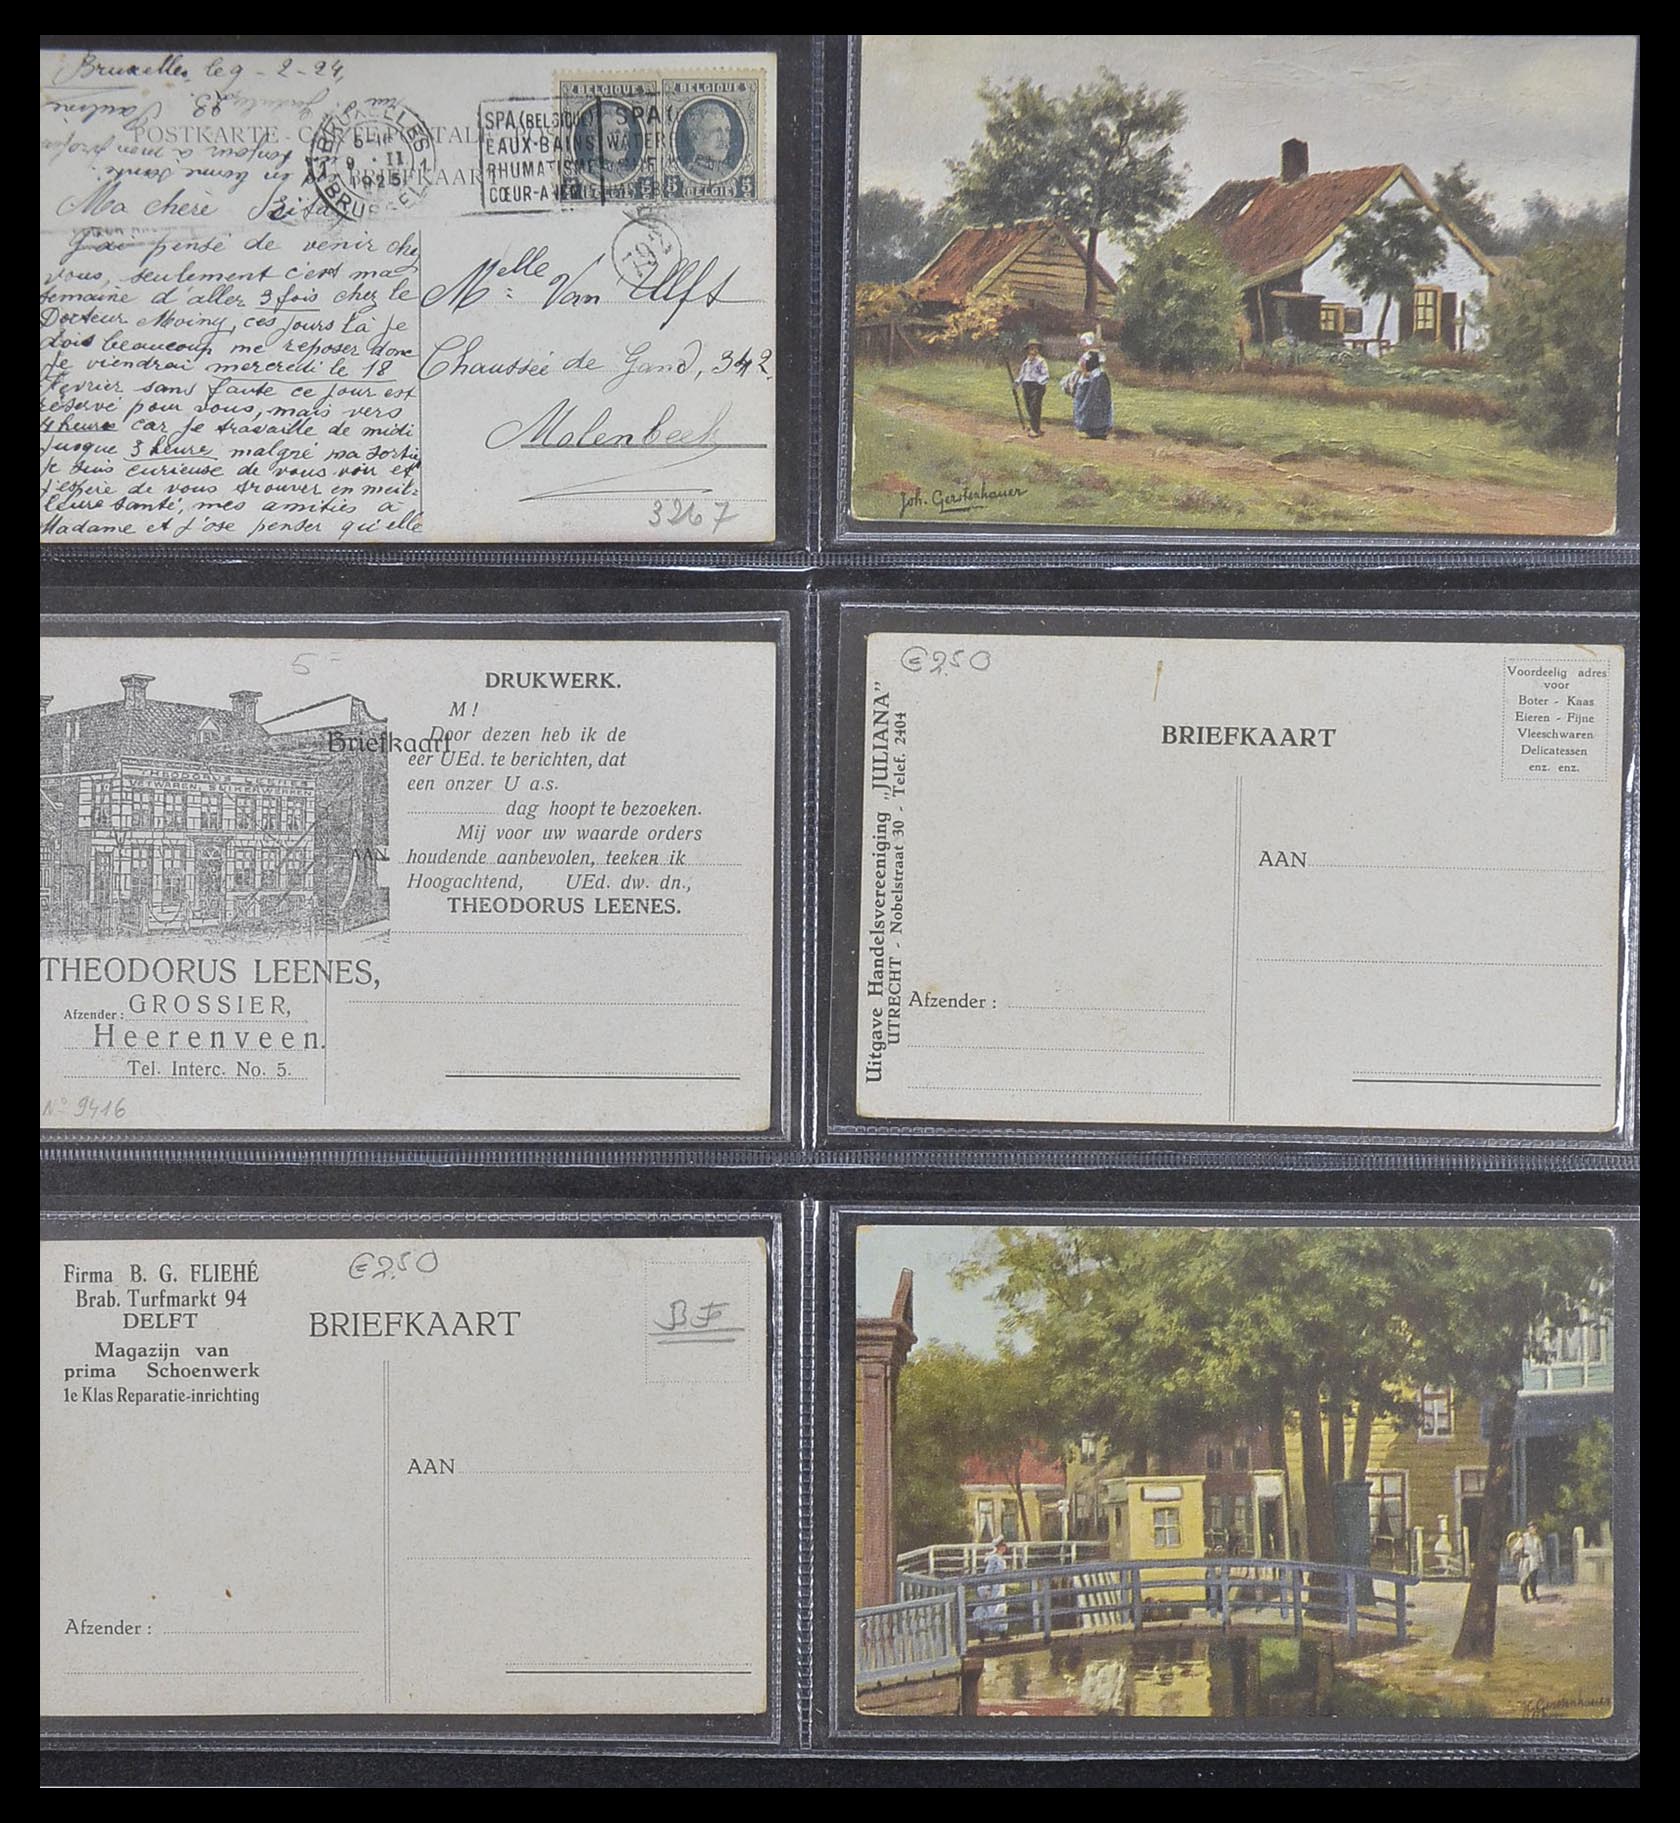 33928 061 - Stamp collection 33928 Netherlands picture postcards 1910-1930.